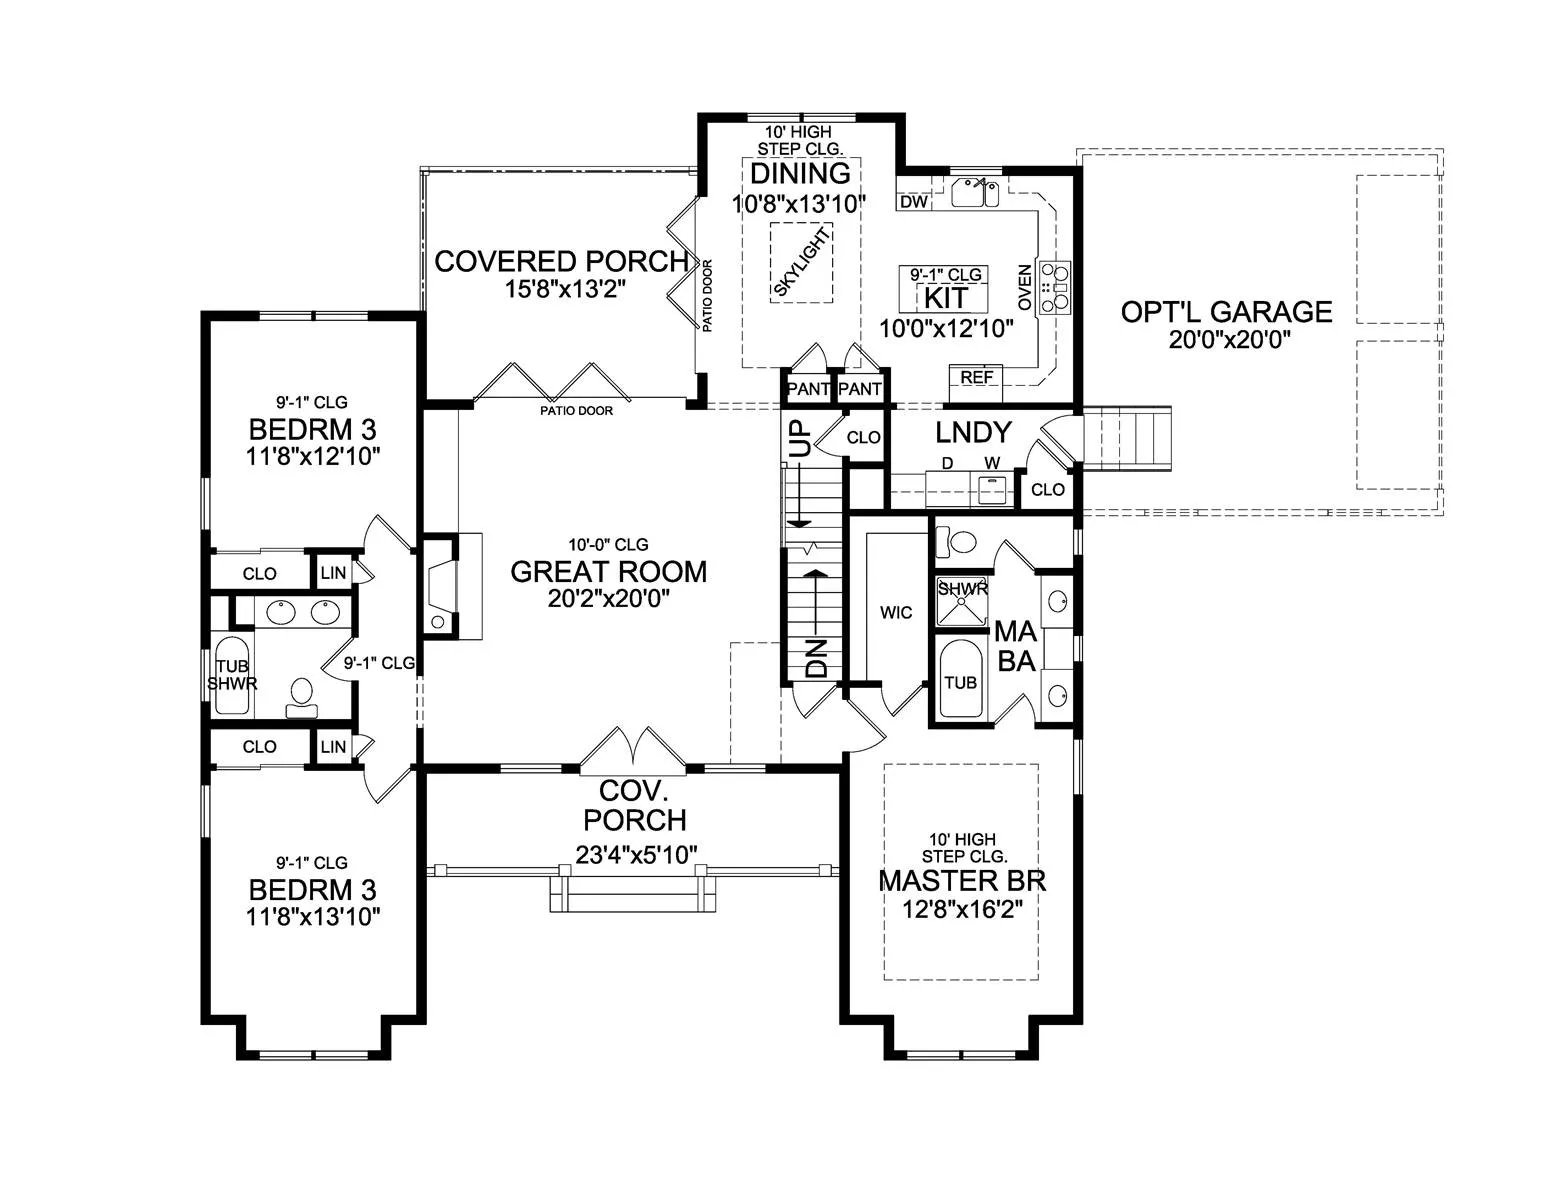 House Plans: Side Left, The proposed plans, showing the hou…